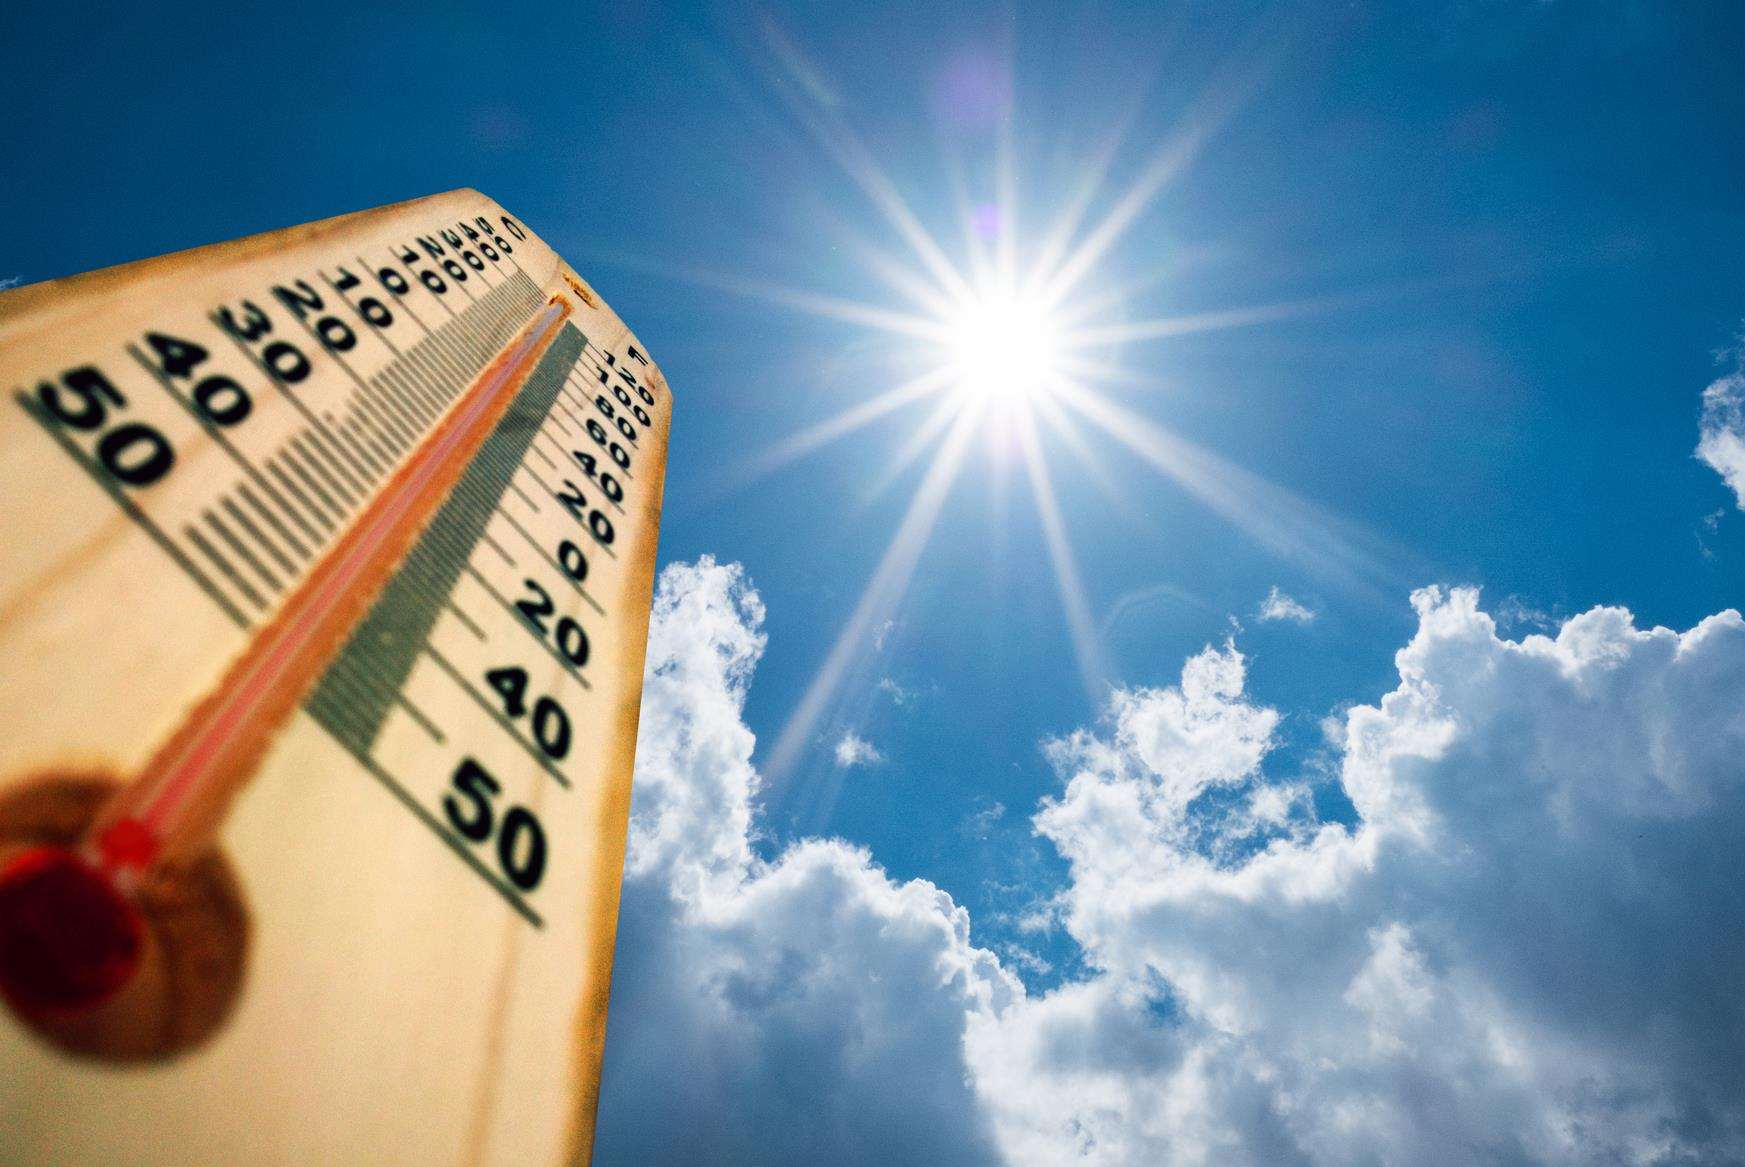 Gravesend weather station has recorded some of the UK's hottest temperatures.